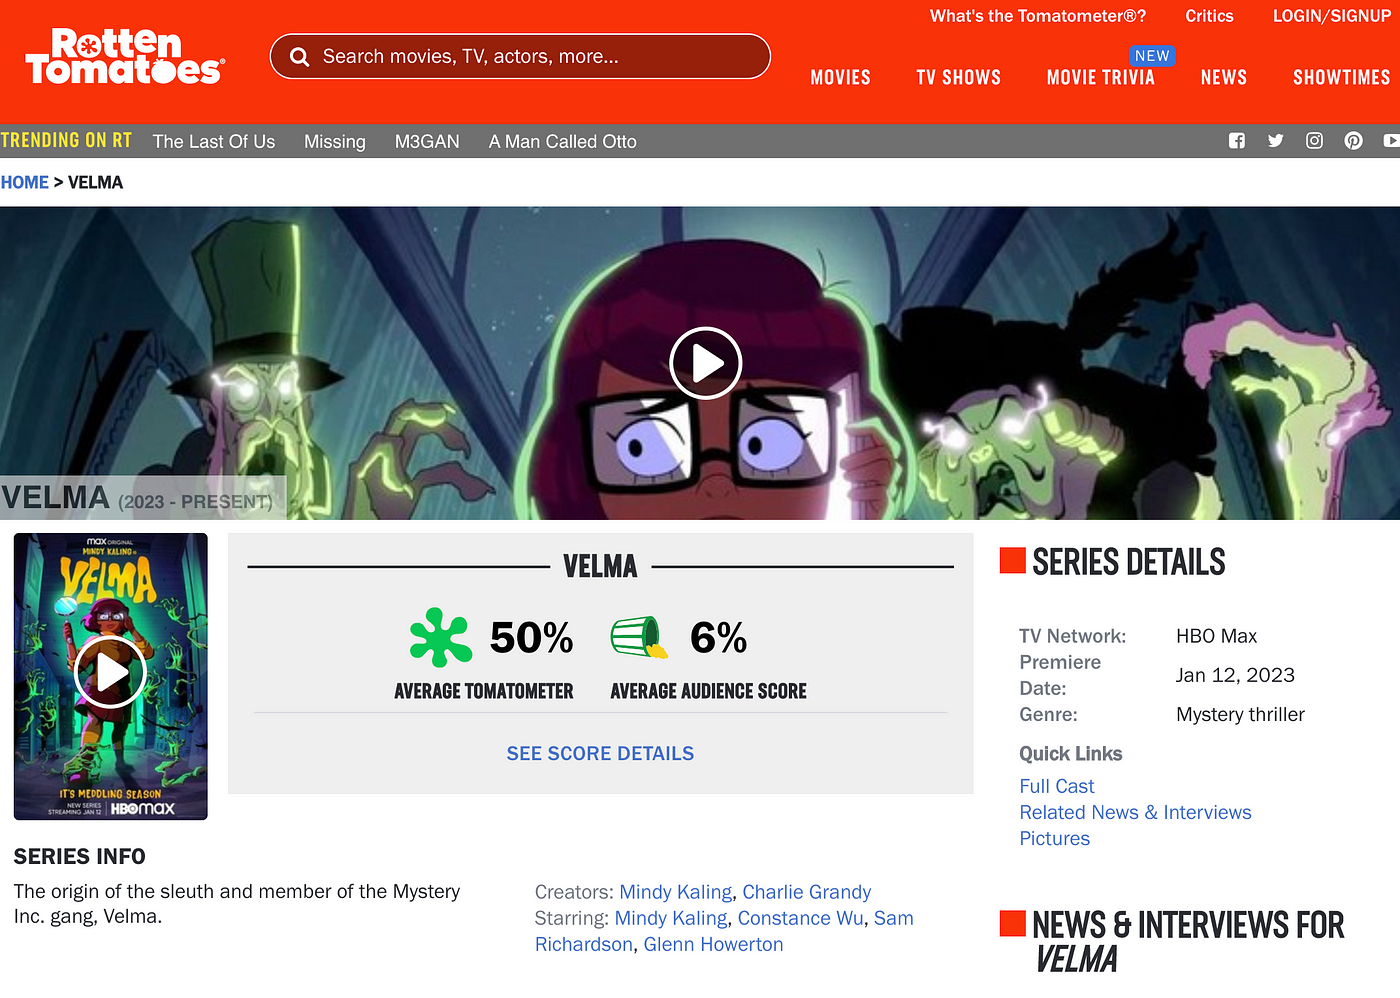 Velma on HBO Max is officially awful — Rotten Tomatoes audience score is 6%